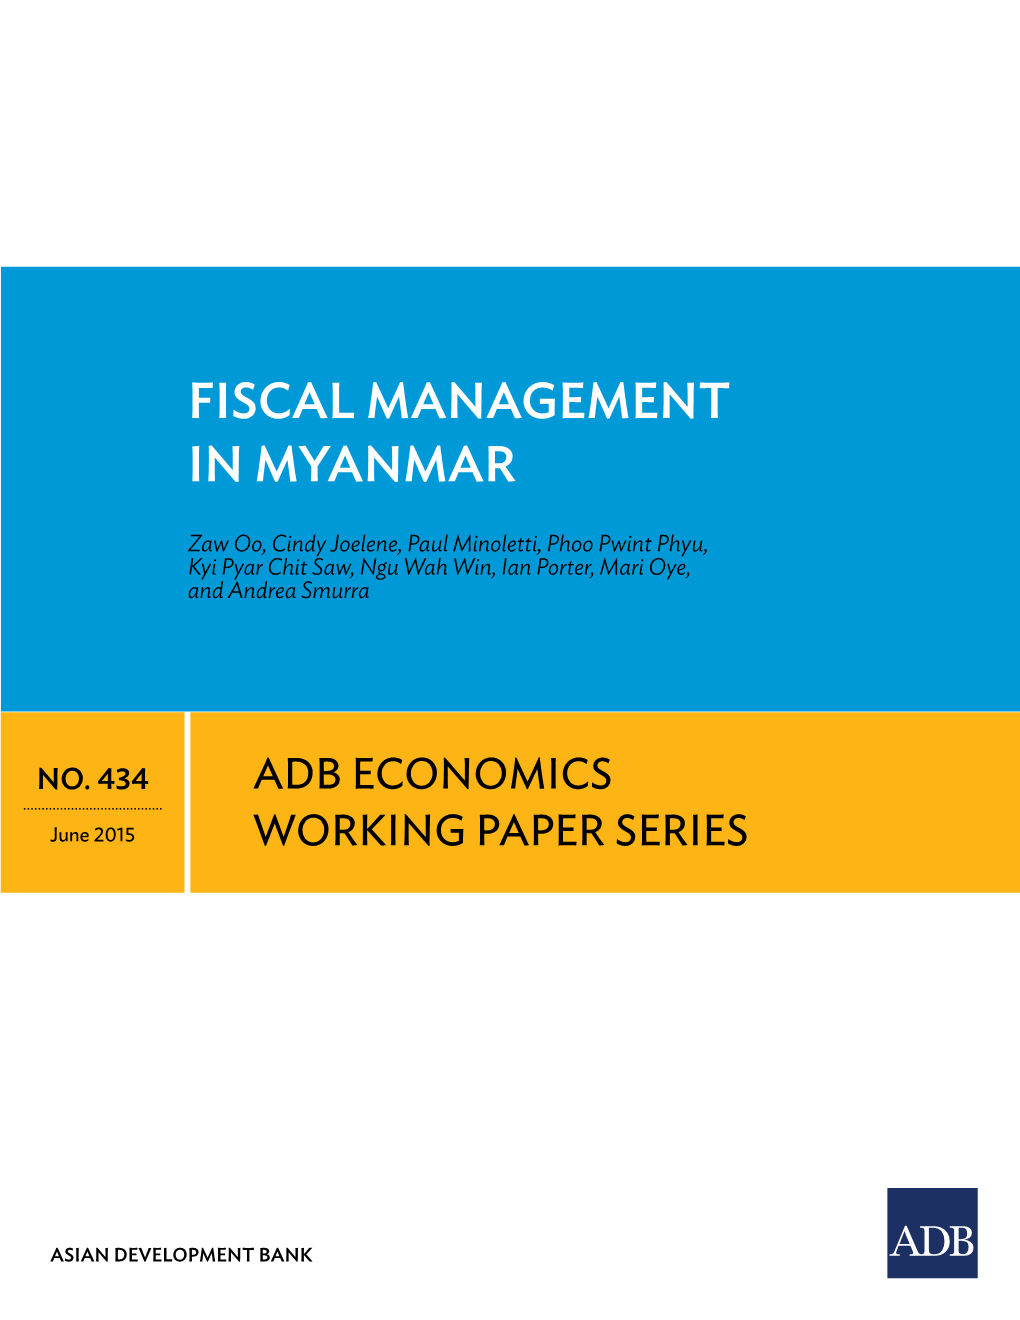 Fiscal Management in Myanmar